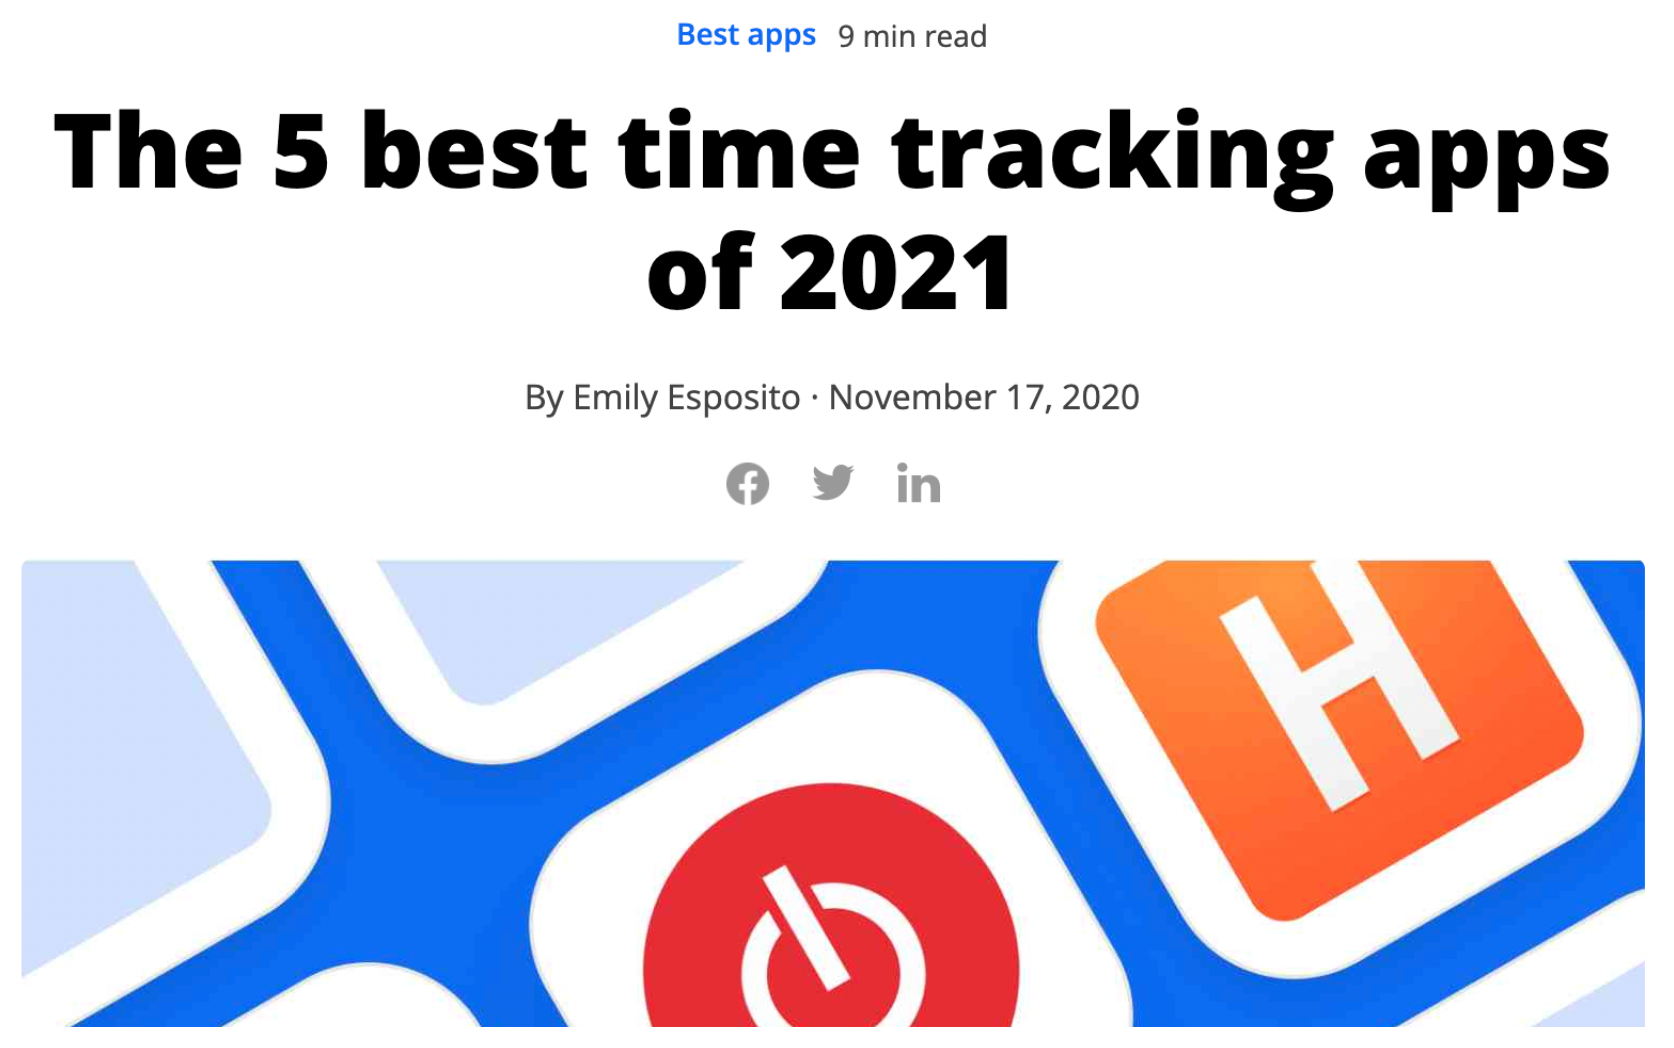 Zapier Best Time Tracking Apps Listicle